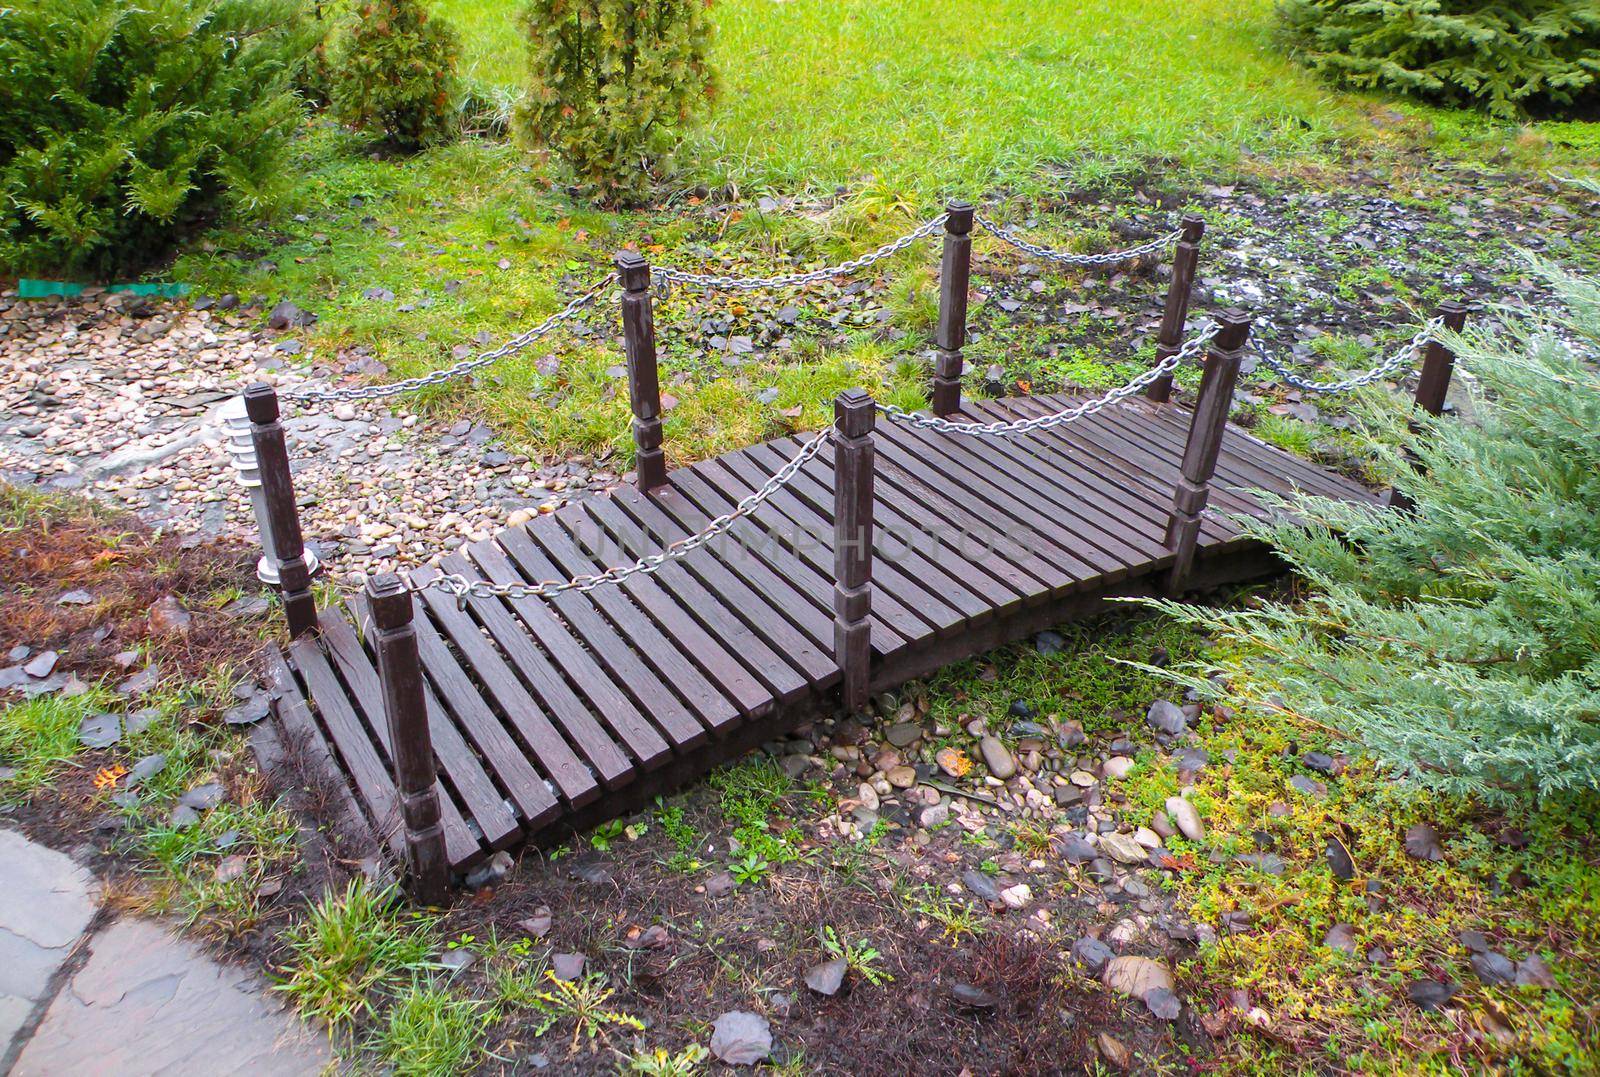 A small wooden bridge made of brown wood in the garden. A bridge over a stream in stones.